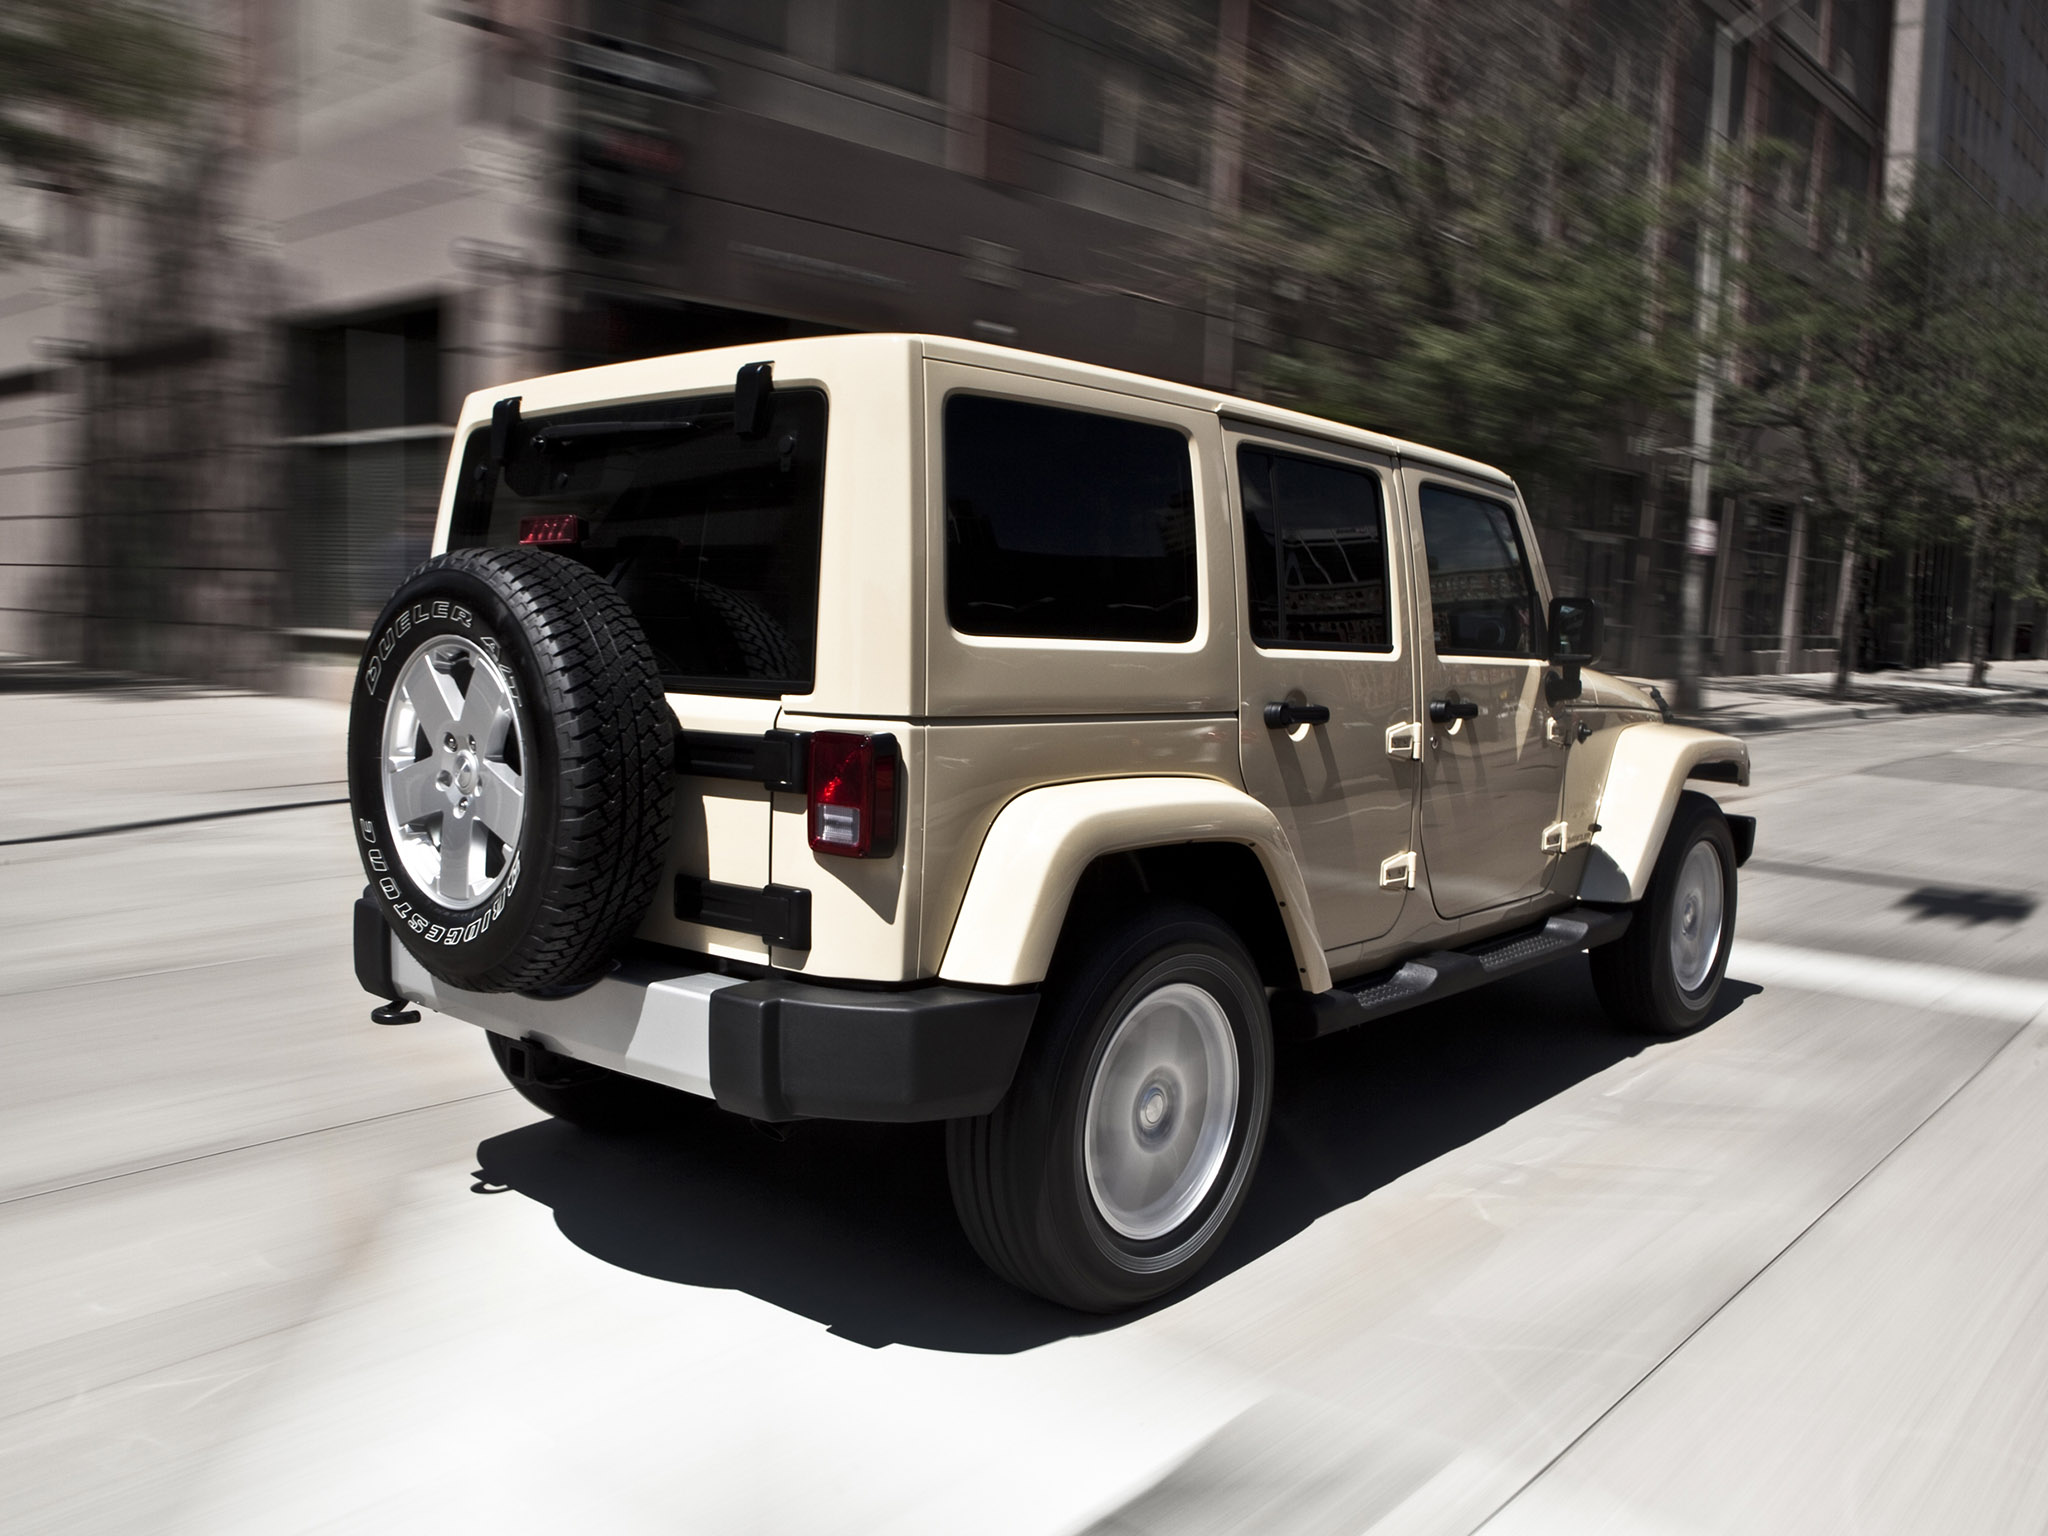 Car in pictures – car photo gallery » Jeep Wrangler Sahara Unlimited